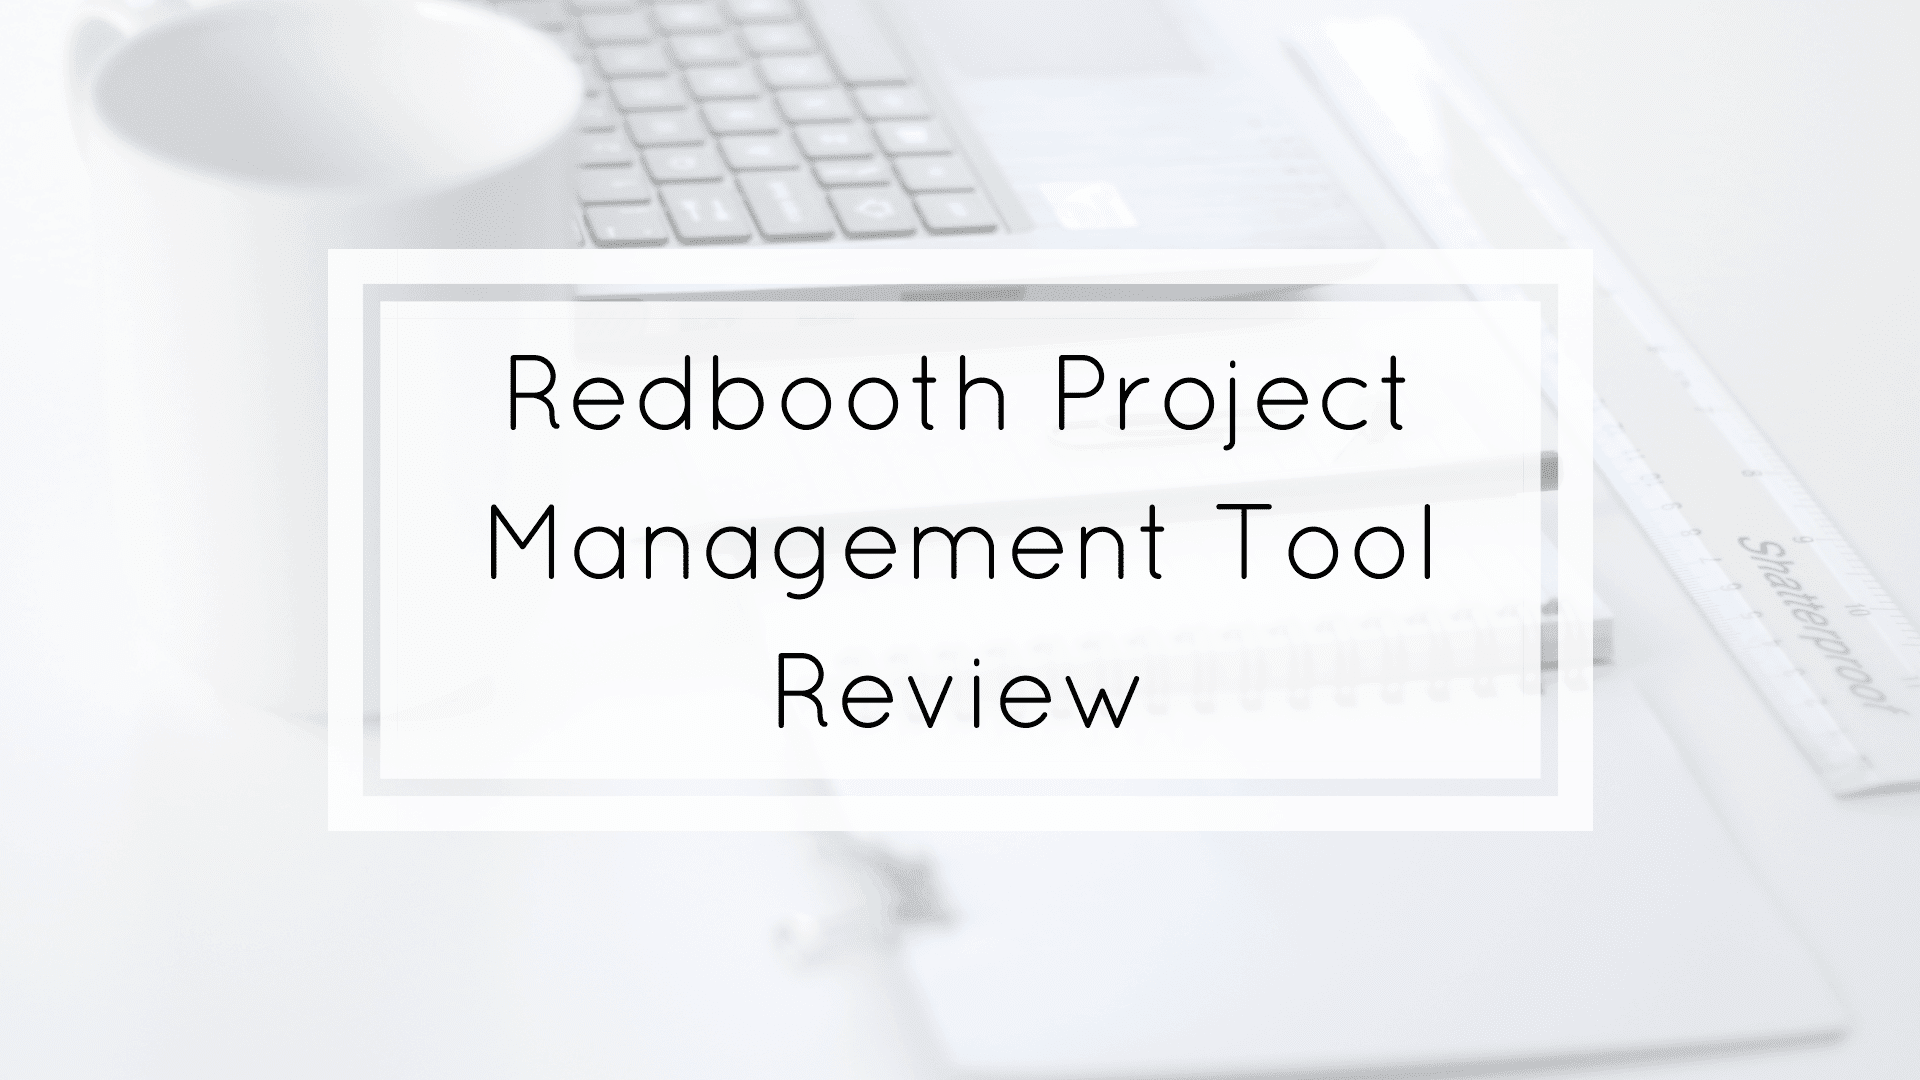 Redbooth project management tool review